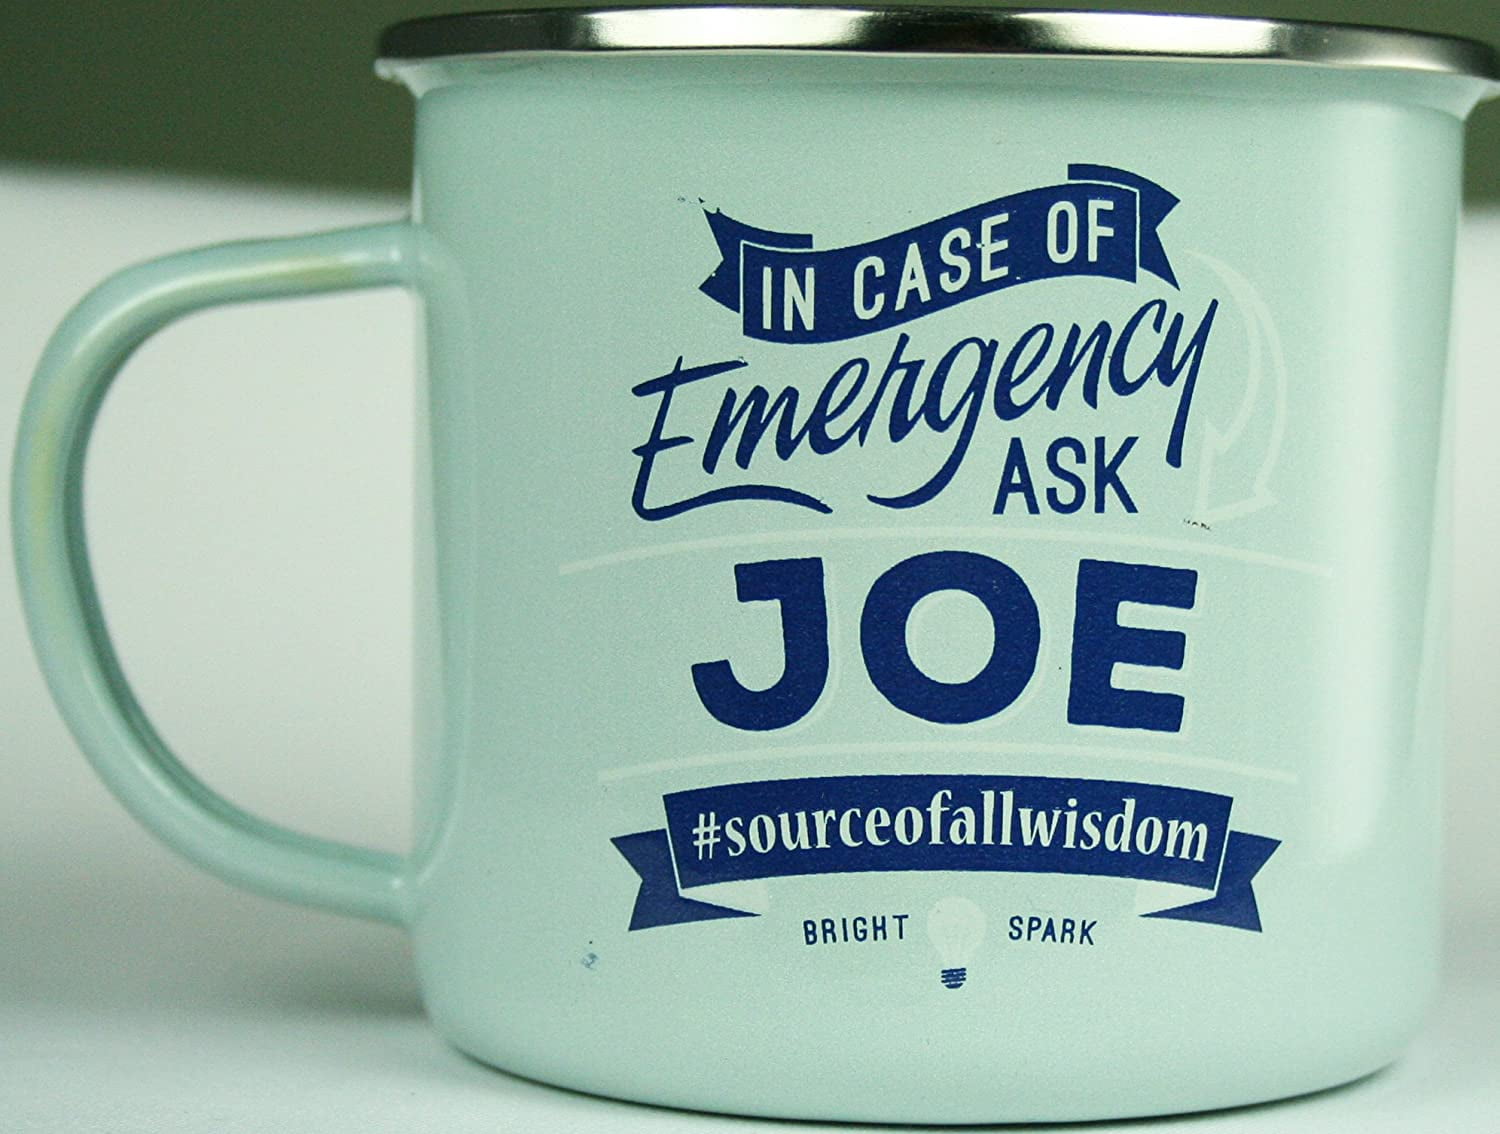 Funny mug cup IN CASE OF EMERGENCY FILL WITH WINE gift present 